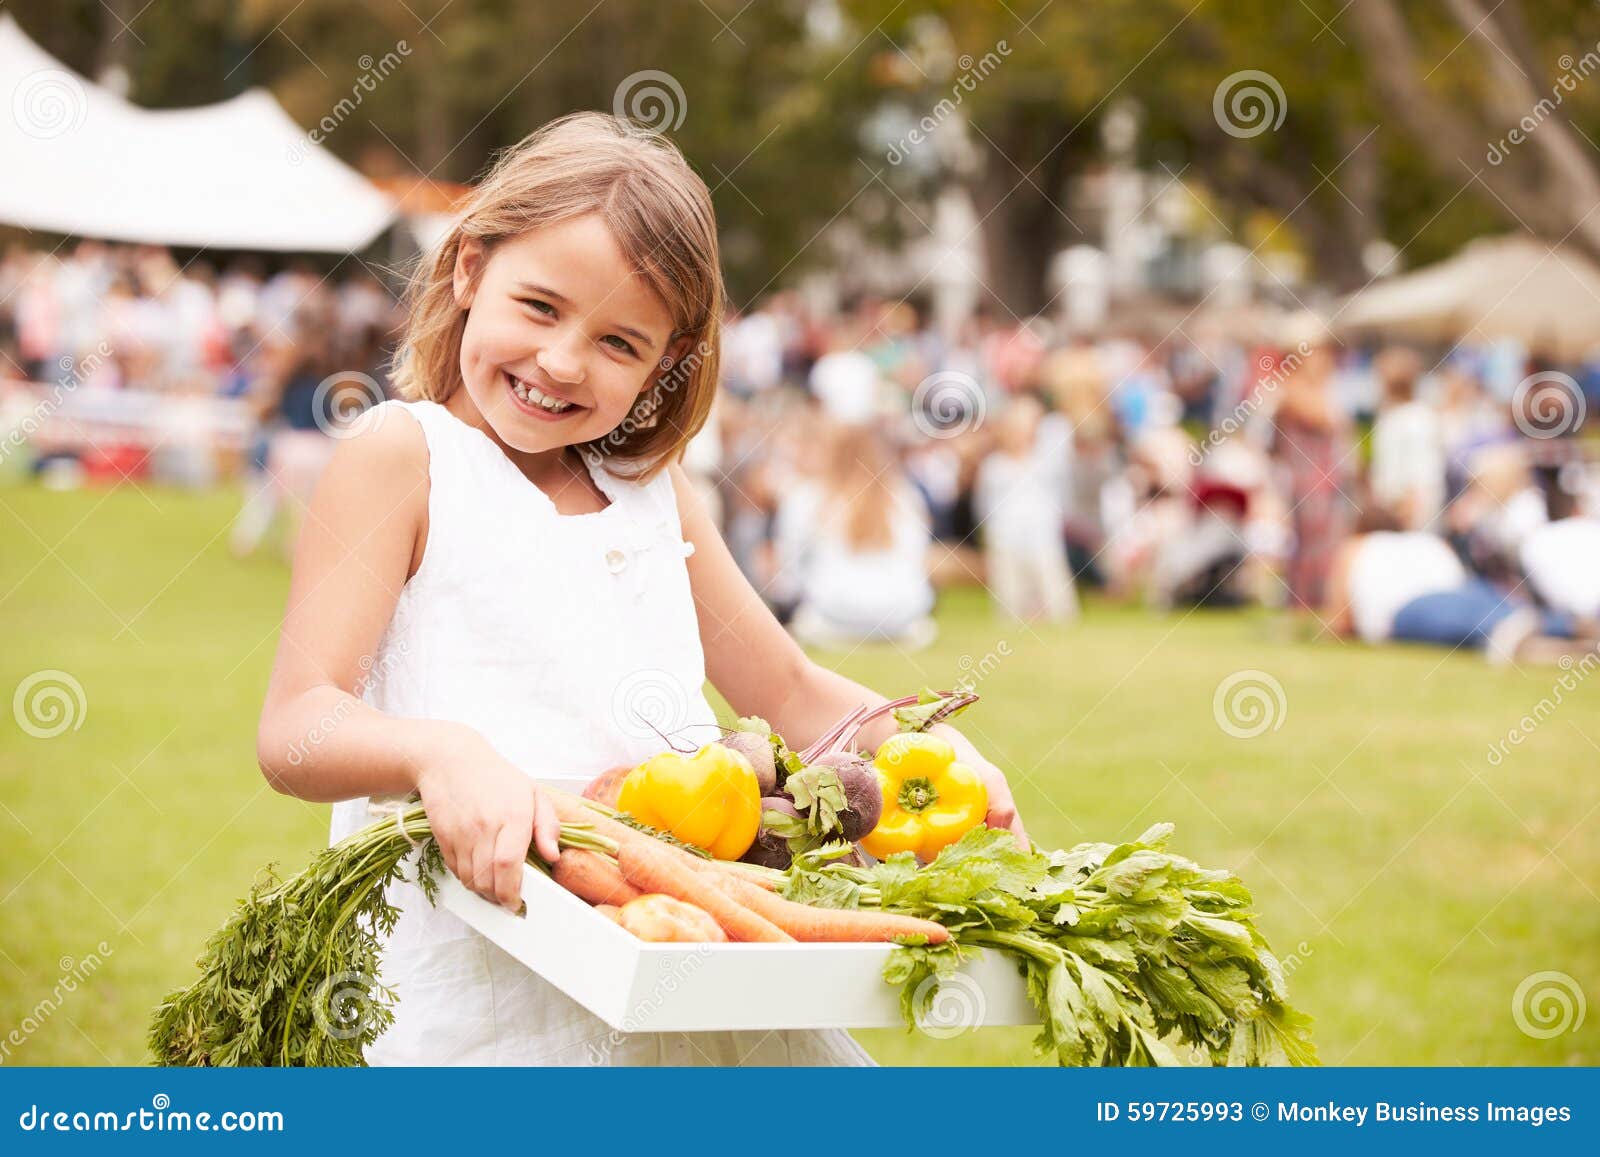 girl with fresh produce bought at outdoor farmers market